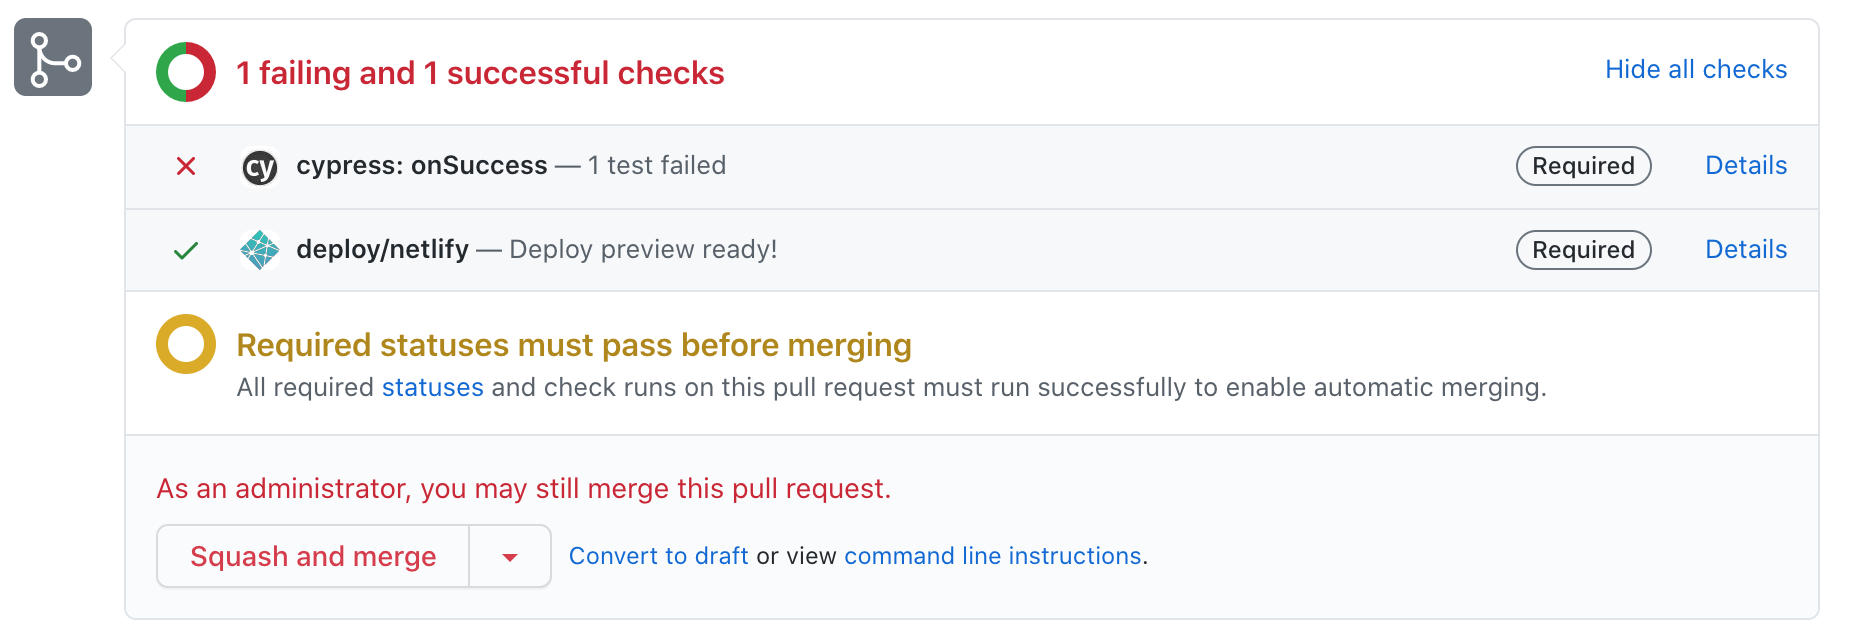 Pull request with failing tests cannot be merged